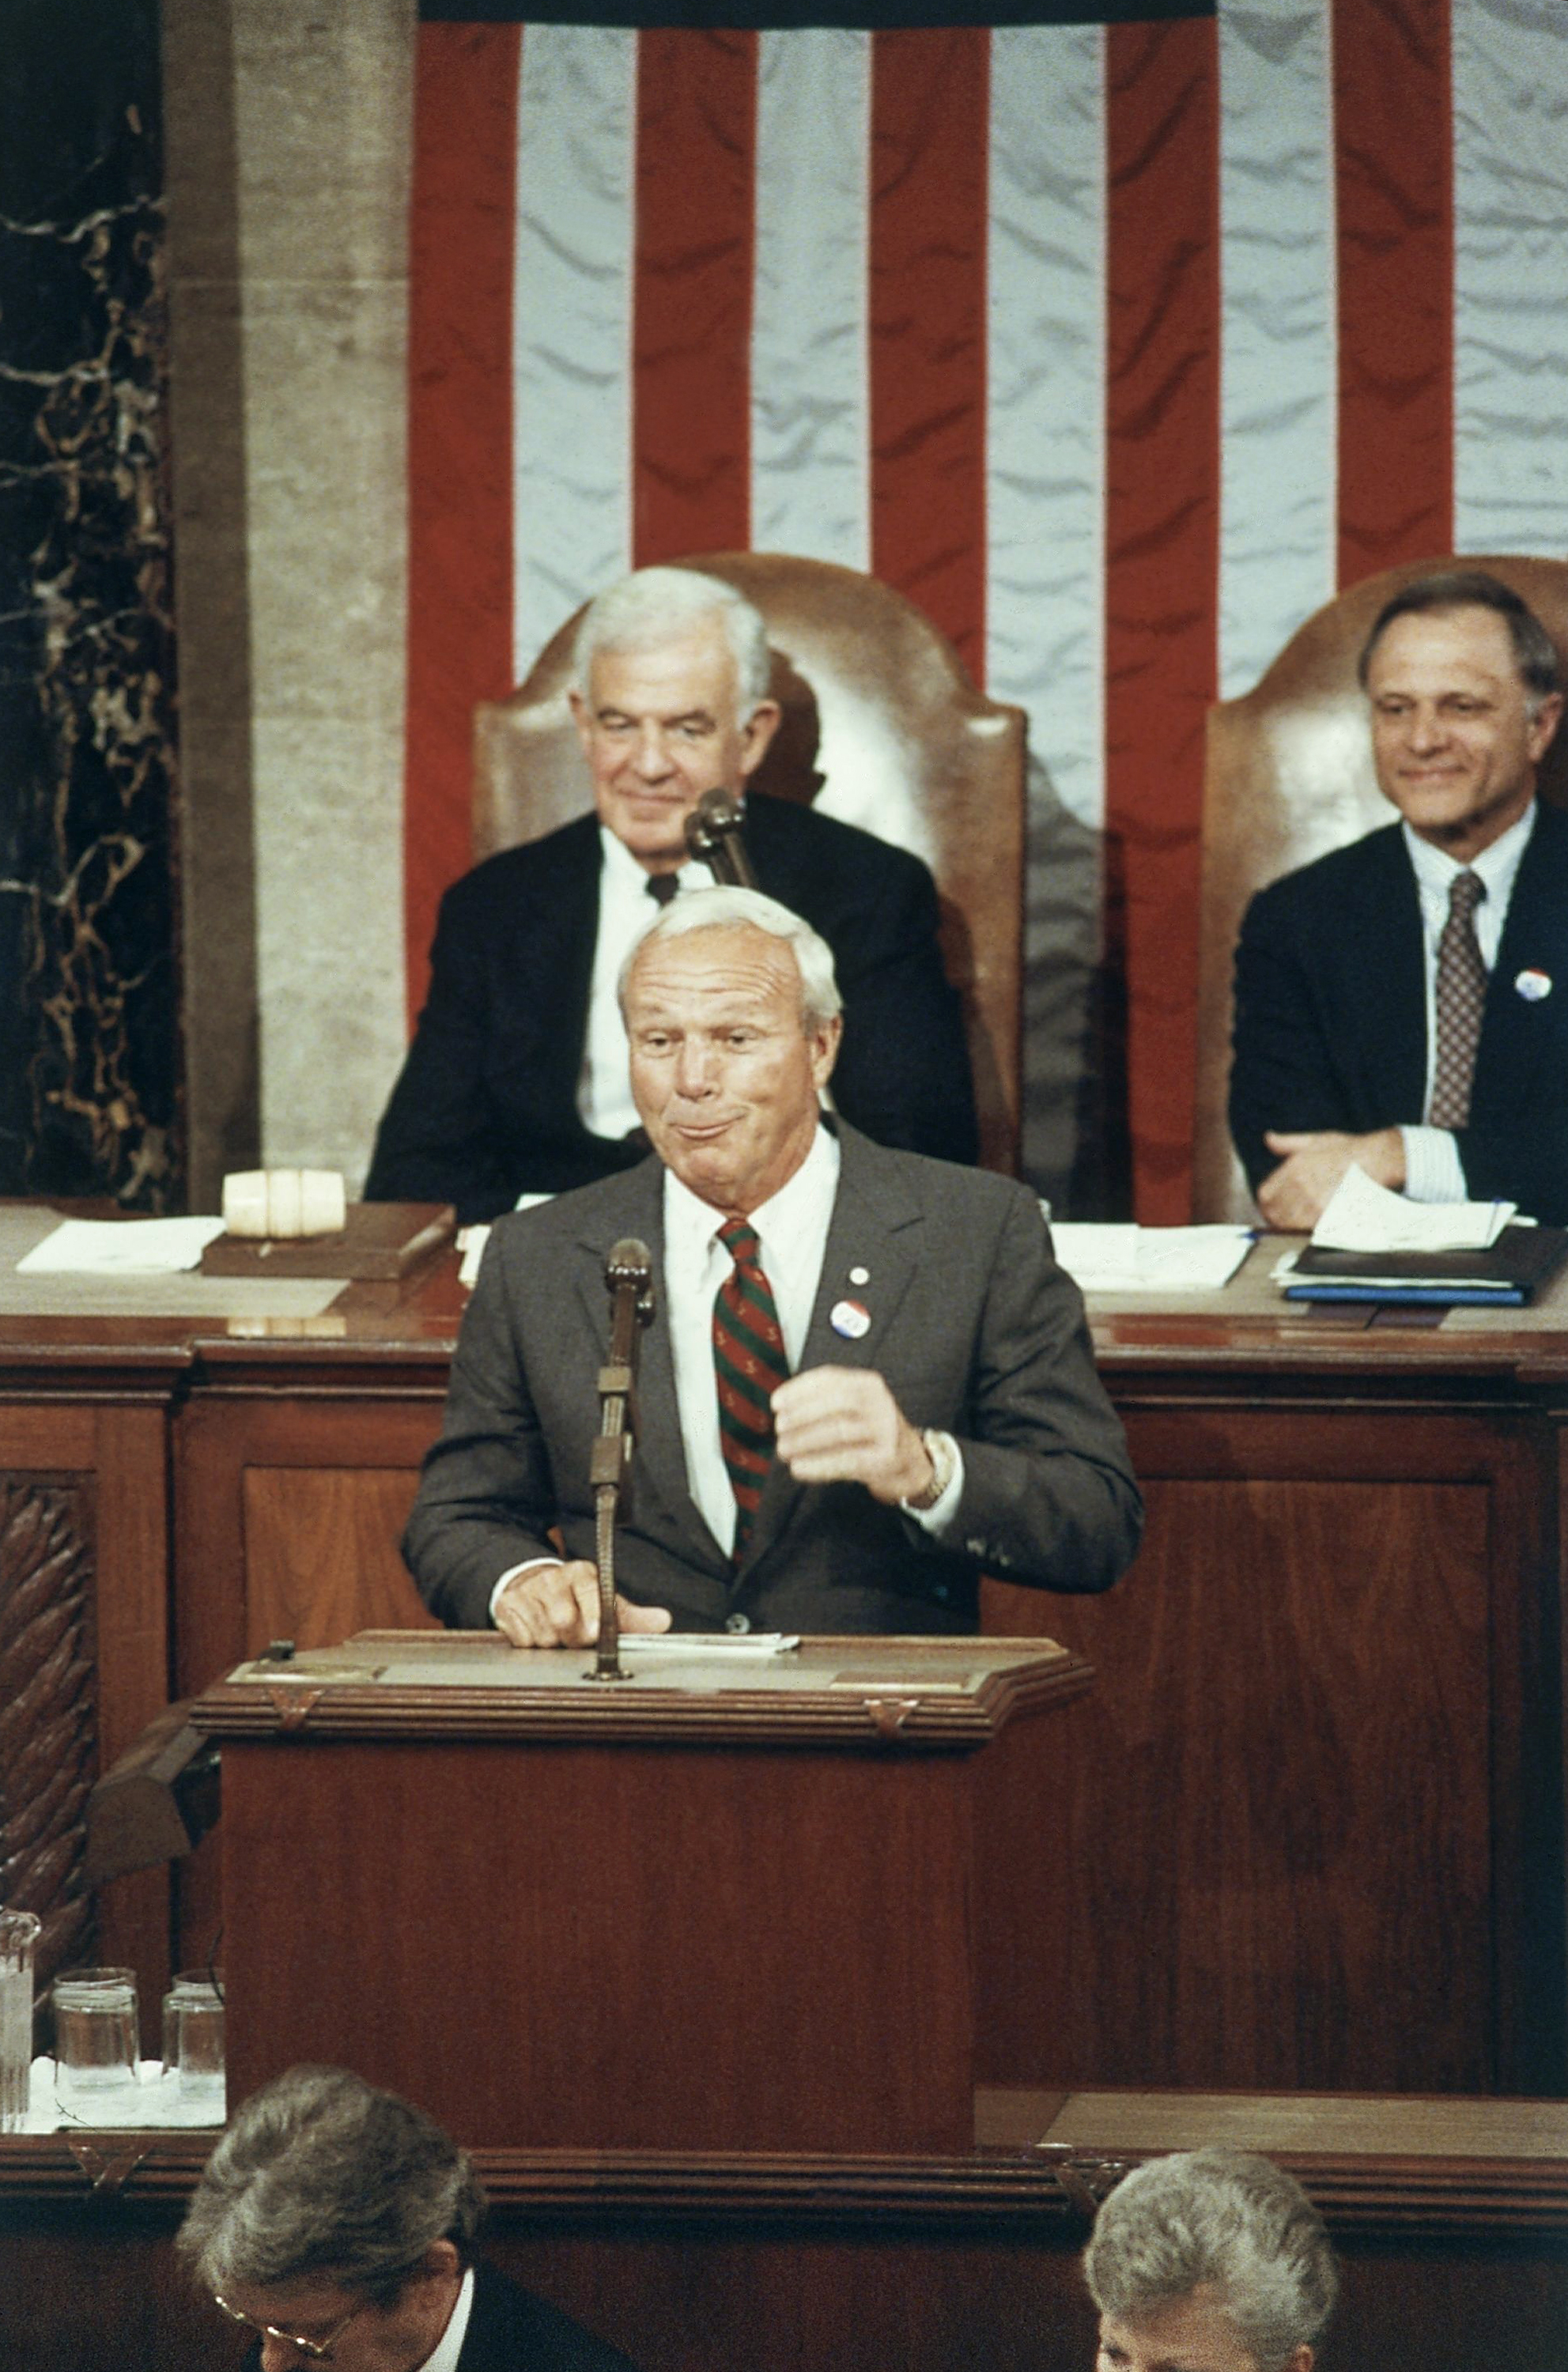 Arnold Palmer, at podium, speaks before a Joint Meeting of Congress marking the centennial of former President Dwight D. Eisenhower, on March 27, 1990, in Washington, D.C. House Speaker Tom Foley sits behind Palmer.